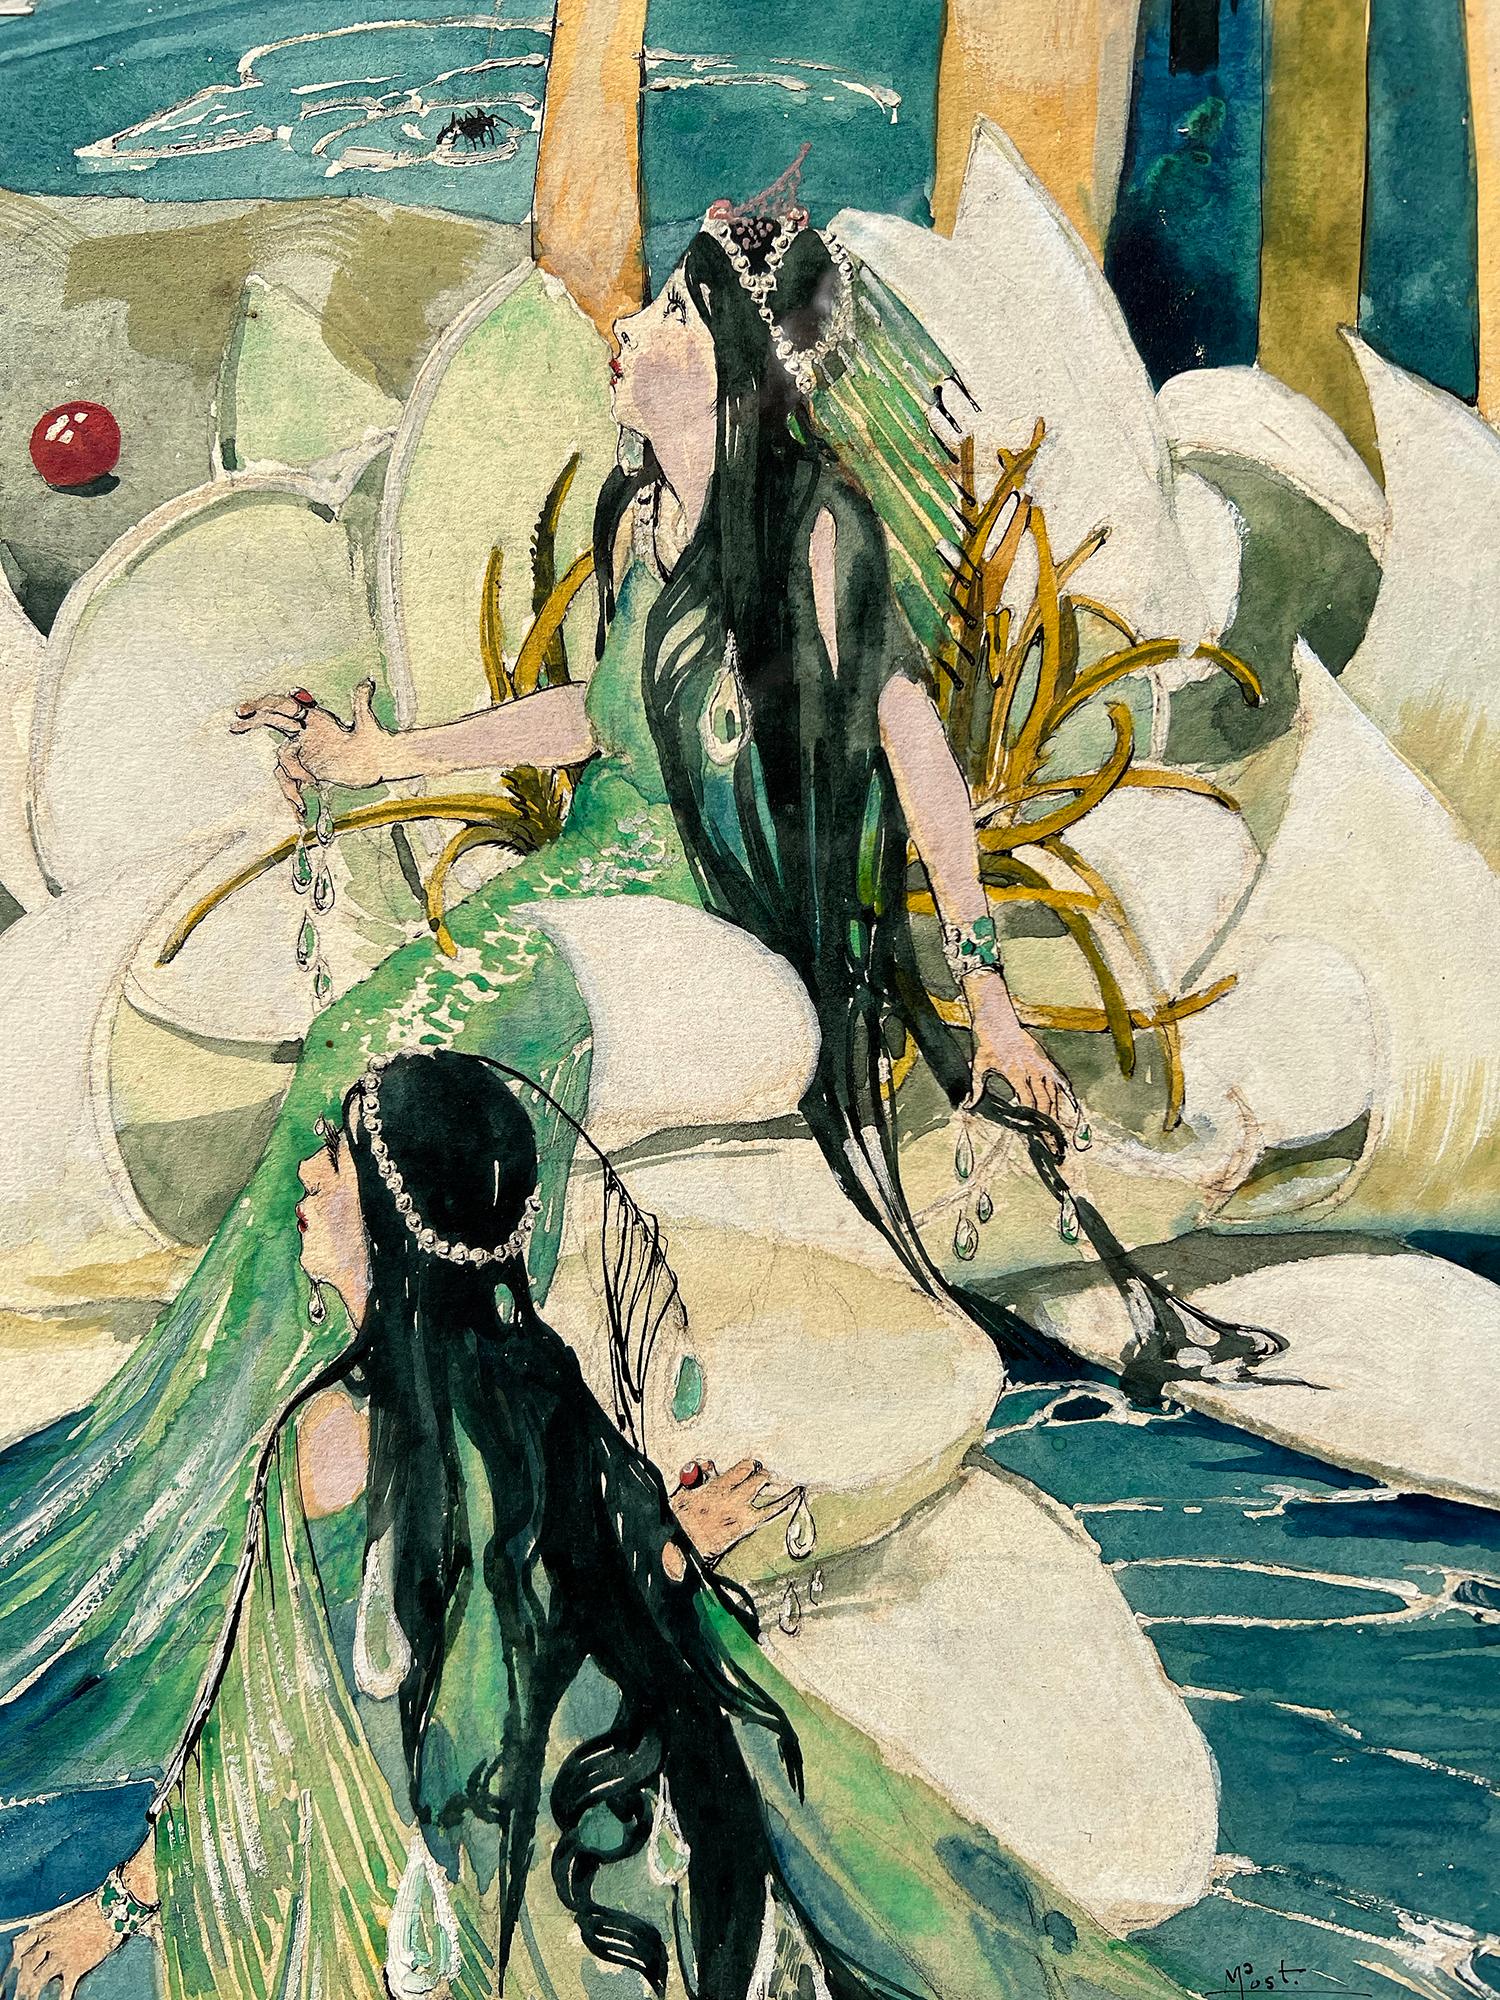 A turn-of-the-century fantasy illustration by female illustrator May Audubon Post features a charming fairy with expanded wings resting on Lilly stems. With a makeshift fishing pole and a spider as bait, she waits for a bite. To her immediate right,